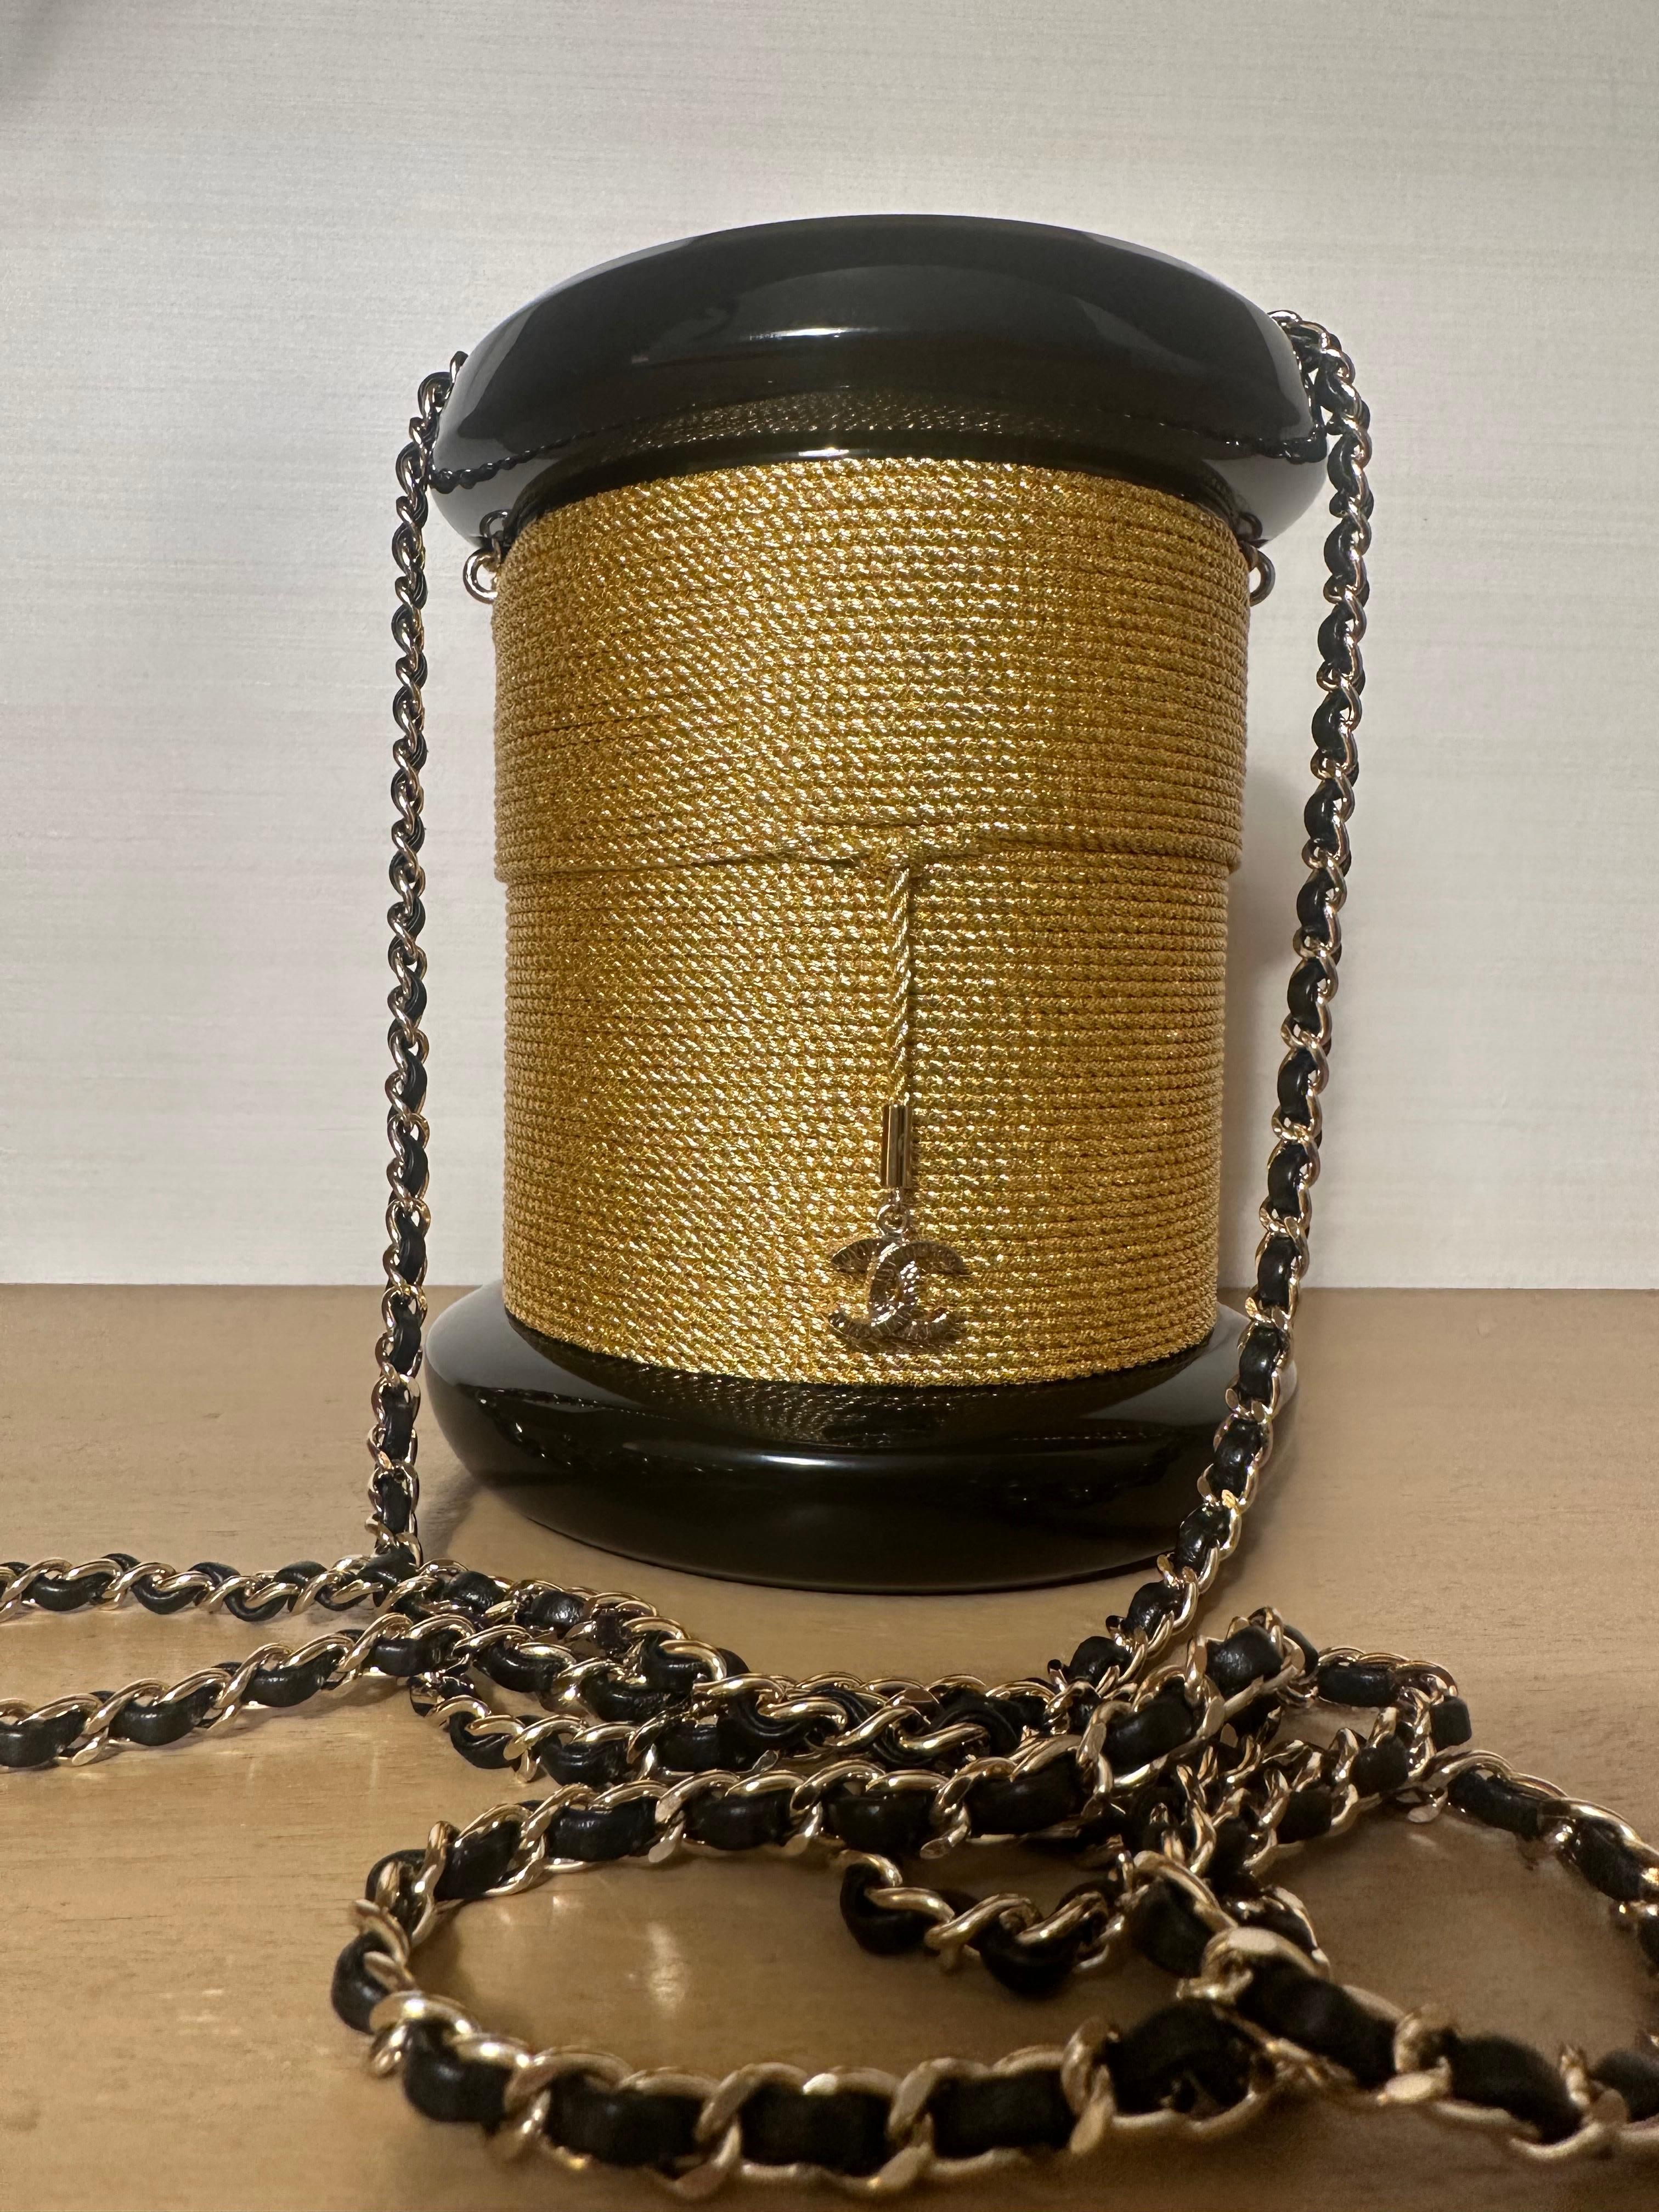 Chanel 2006 Limited Edition Runway Gold. & Black Lucite Spool Evening Bag 

Very rare collectors item. In very good condition - some hairline scratches on hardware. sold with dustbag only.

12 w x 16 h x 12 d cm